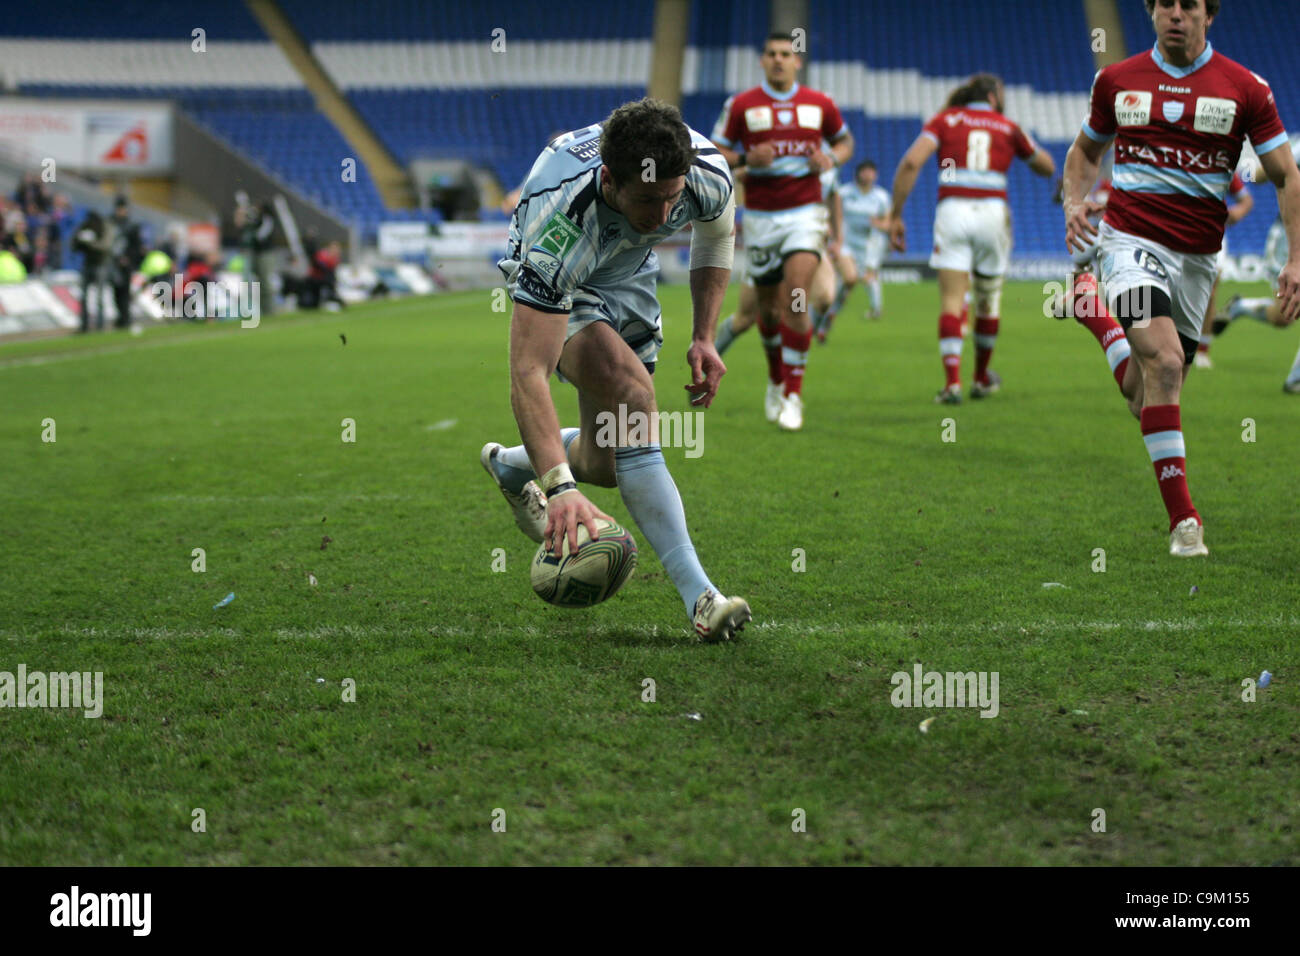 RUGBY - HEINEKEN CUP. CARDIFF BLUES VS. RACING METRO 92. Cardiff 22 JANUARY 2012.    Blues winger Alex Cuthbert scores a try  during the Pool 2 Round 6 match held at the Cardiff City Stadium, Cardiff. Picture Gareth Price - Please Credit Stock Photo